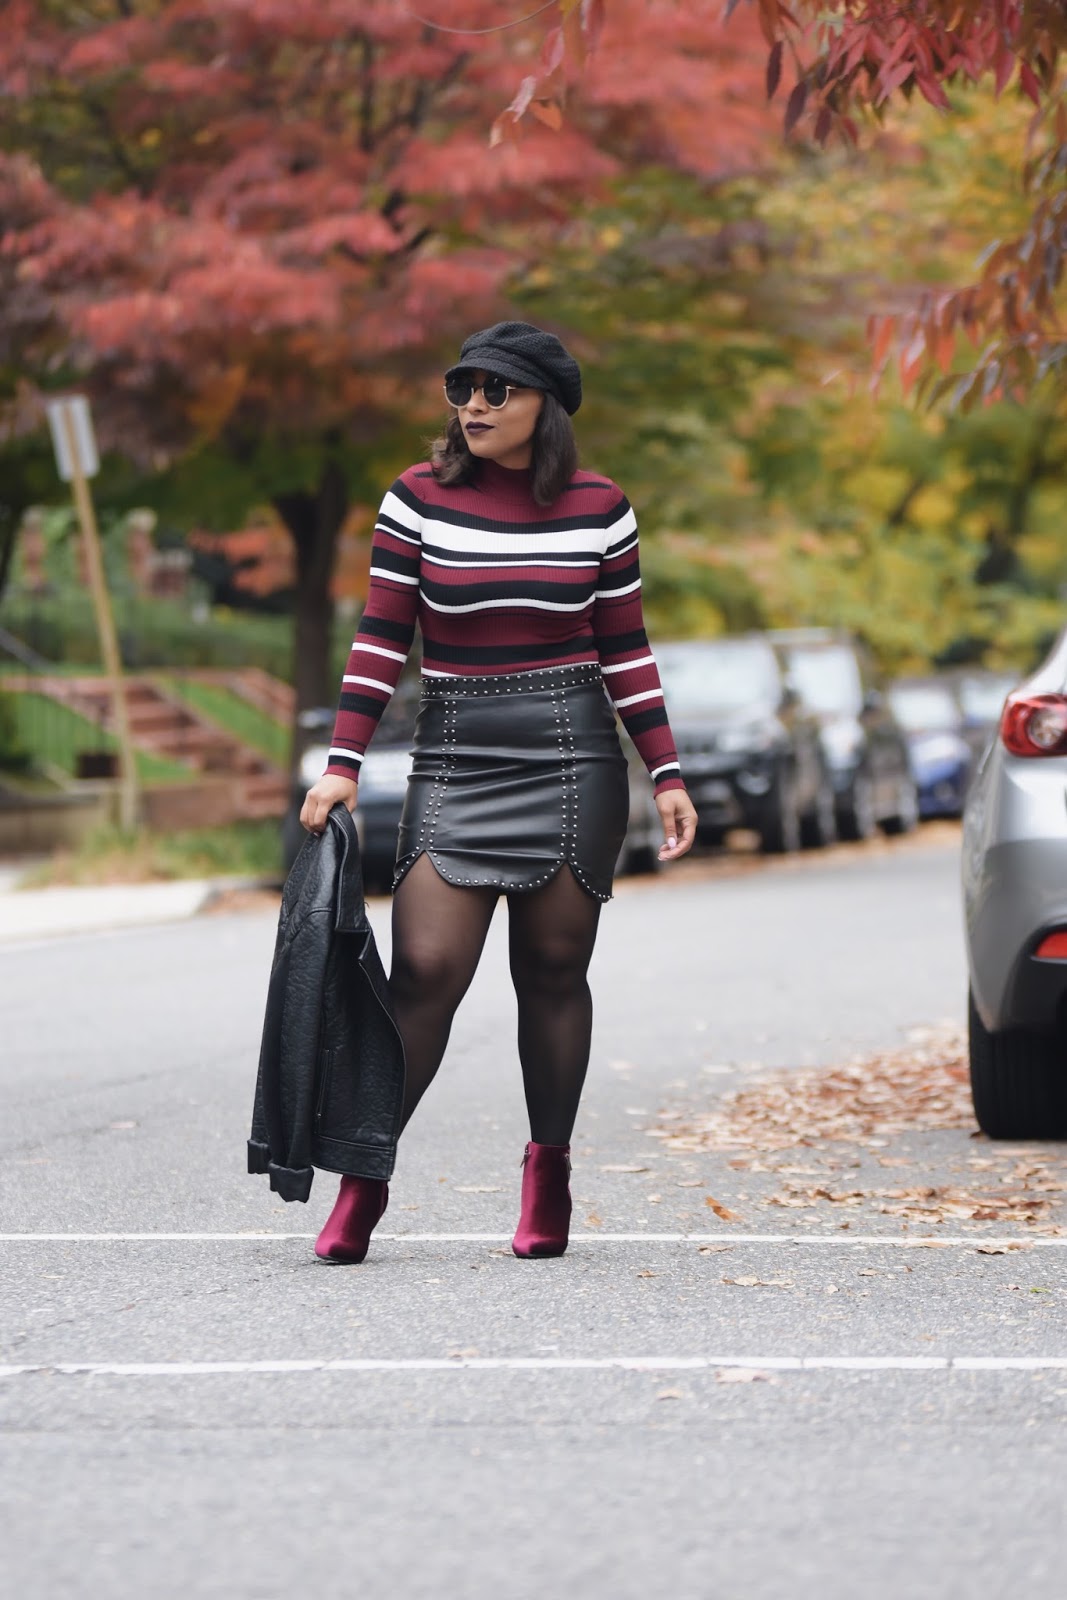 Patty's Kloset, Blogiversary, fashion blogger, fall fashion, rainbow shops, fall outfit ideas, latina bloggers, dominican blogger, newsboy hat, velvet trend, fall hat trends, fall in DC